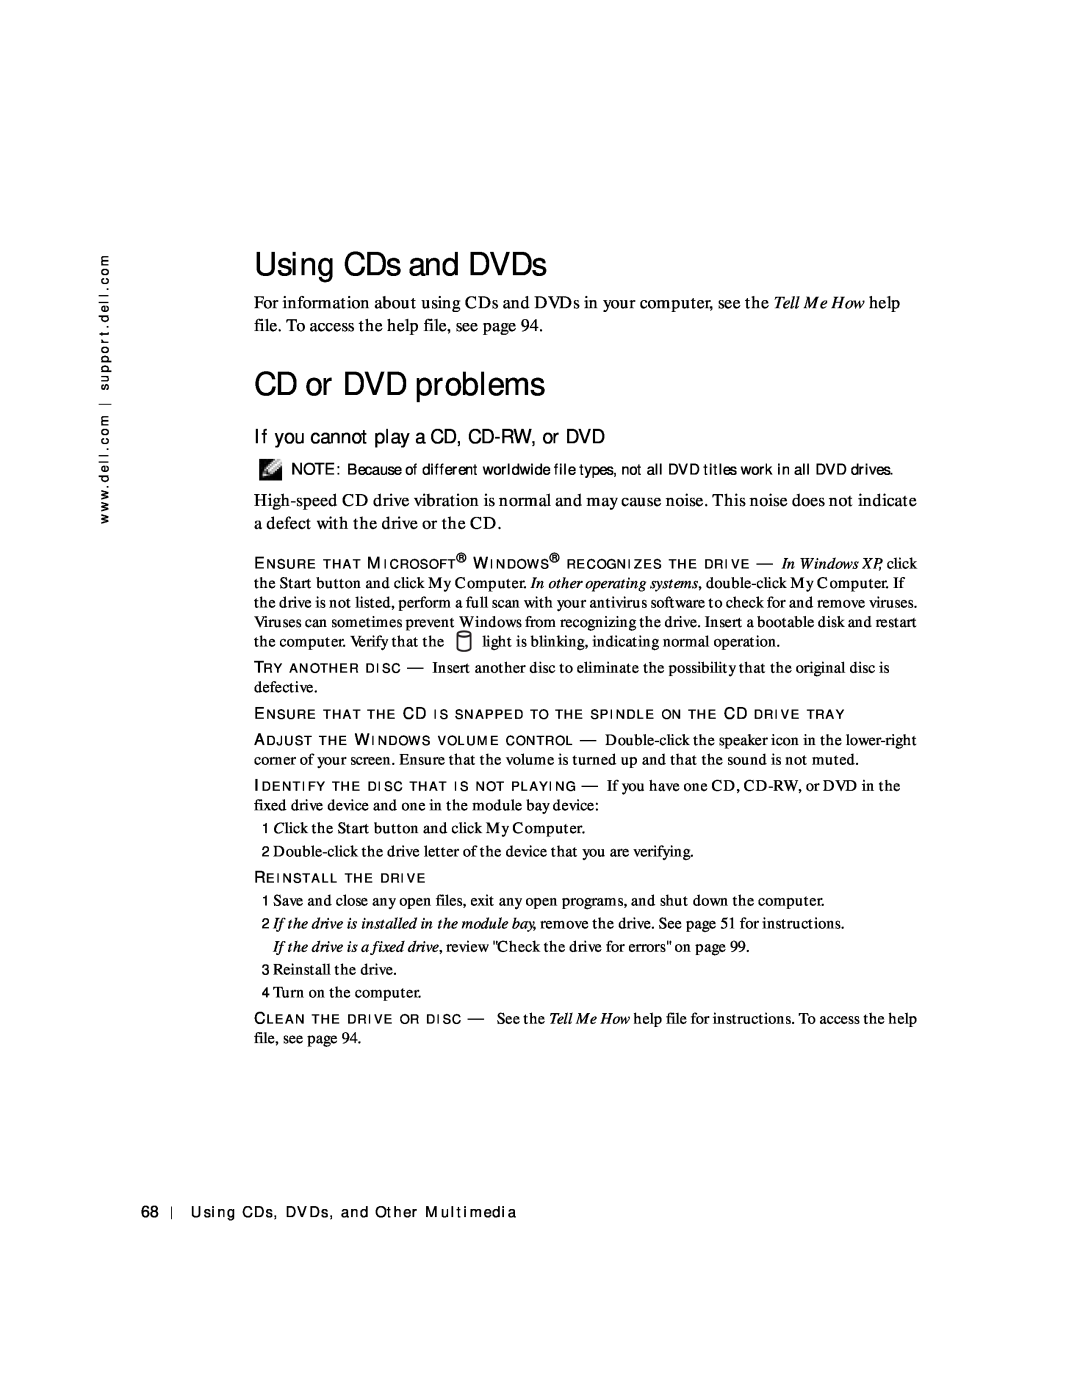 Dell 8600 manual Using CDs and DVDs, CD or DVD problems, If you cannot play a CD, CD-RW, or DVD 